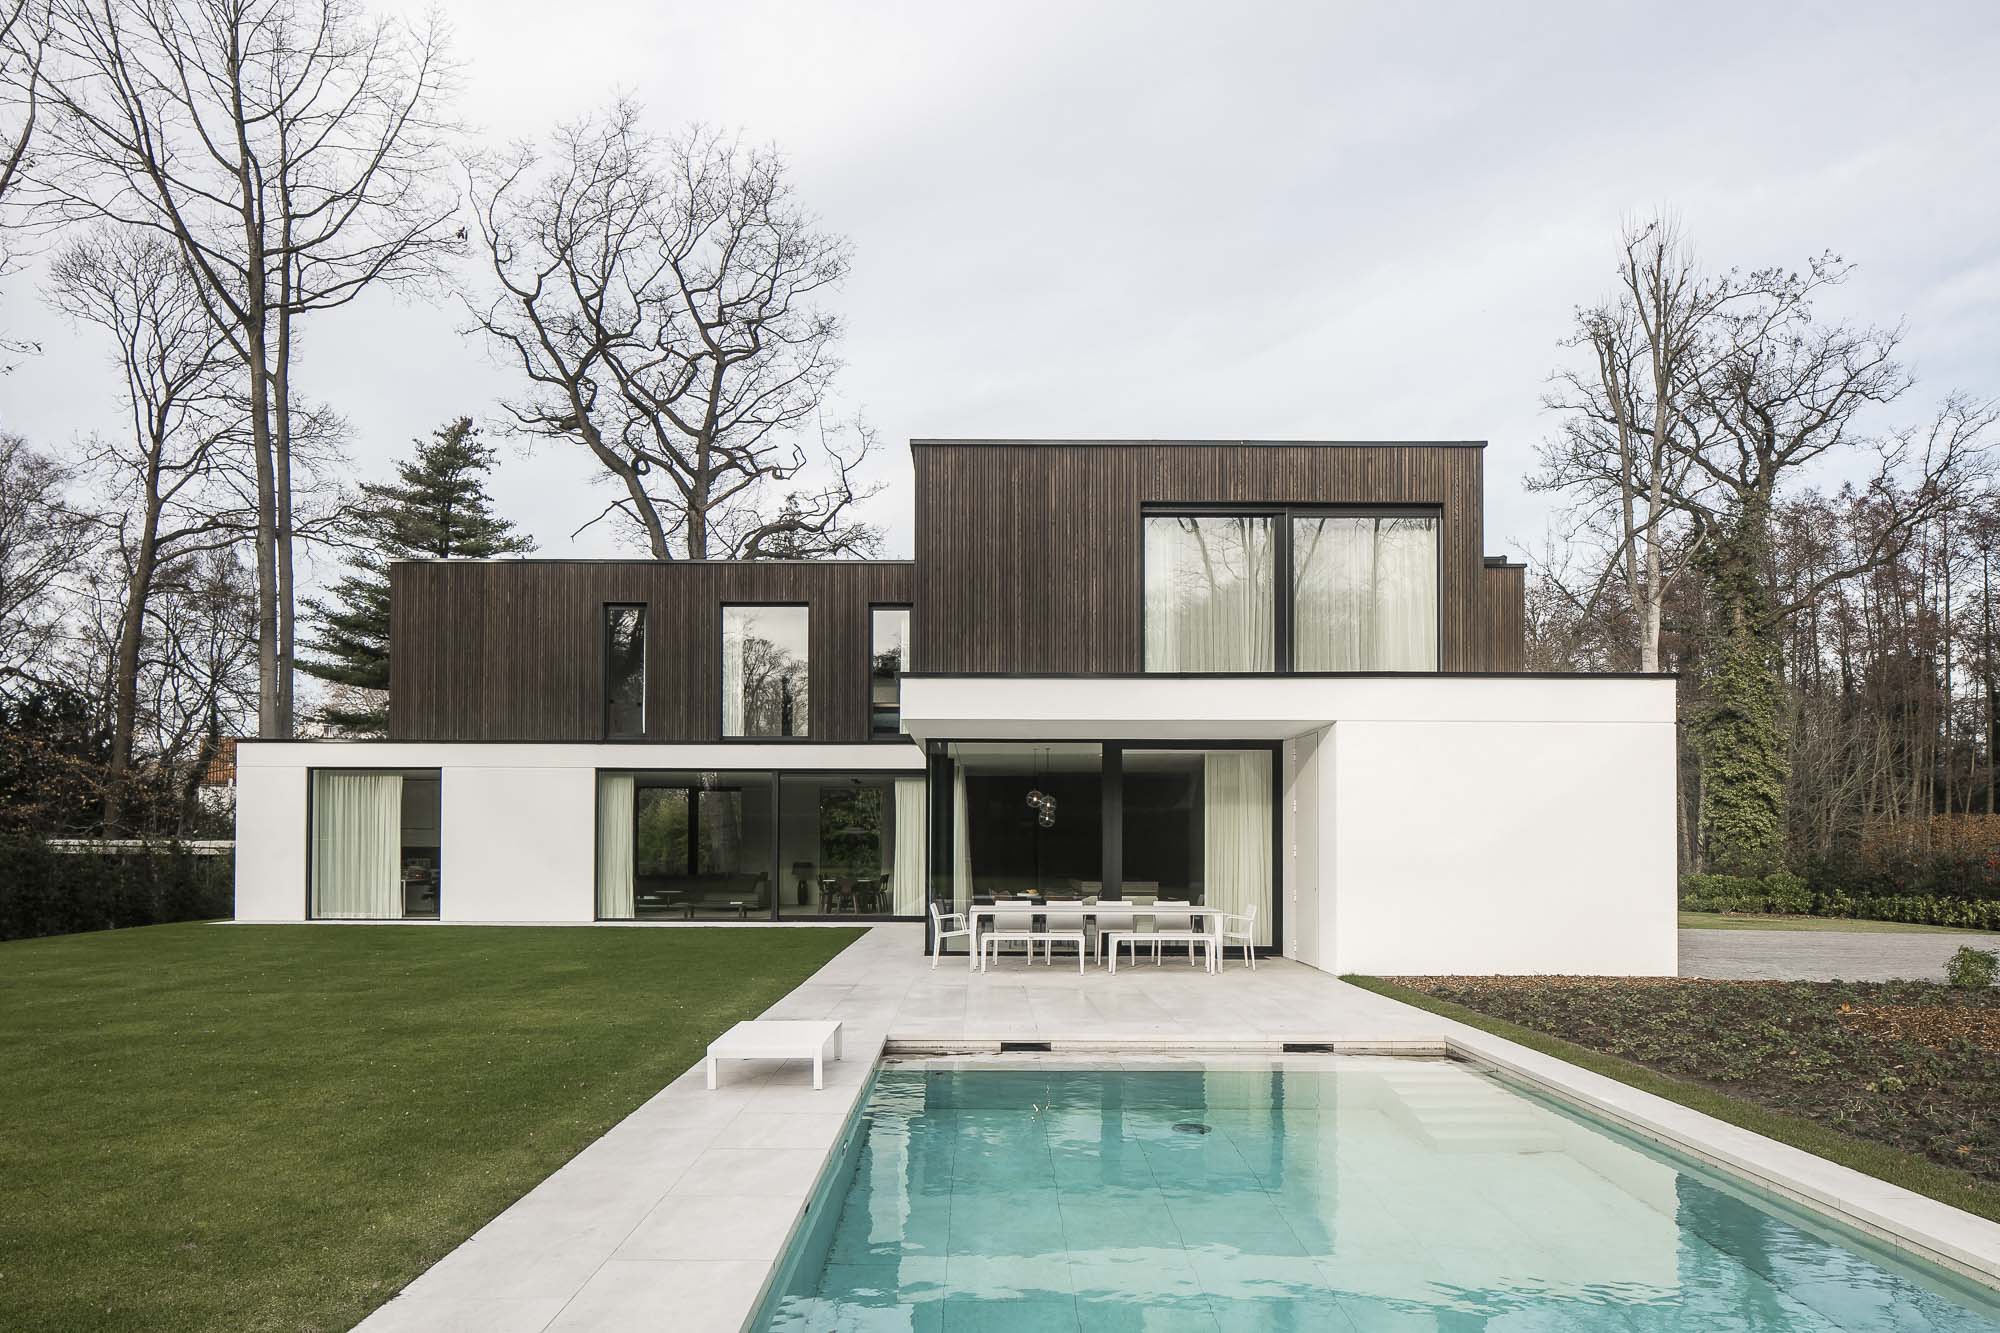 Modern two-tiered home with wooden and white facades. A pristine pool in the foreground complements the green lawn and tall trees that frame the property.